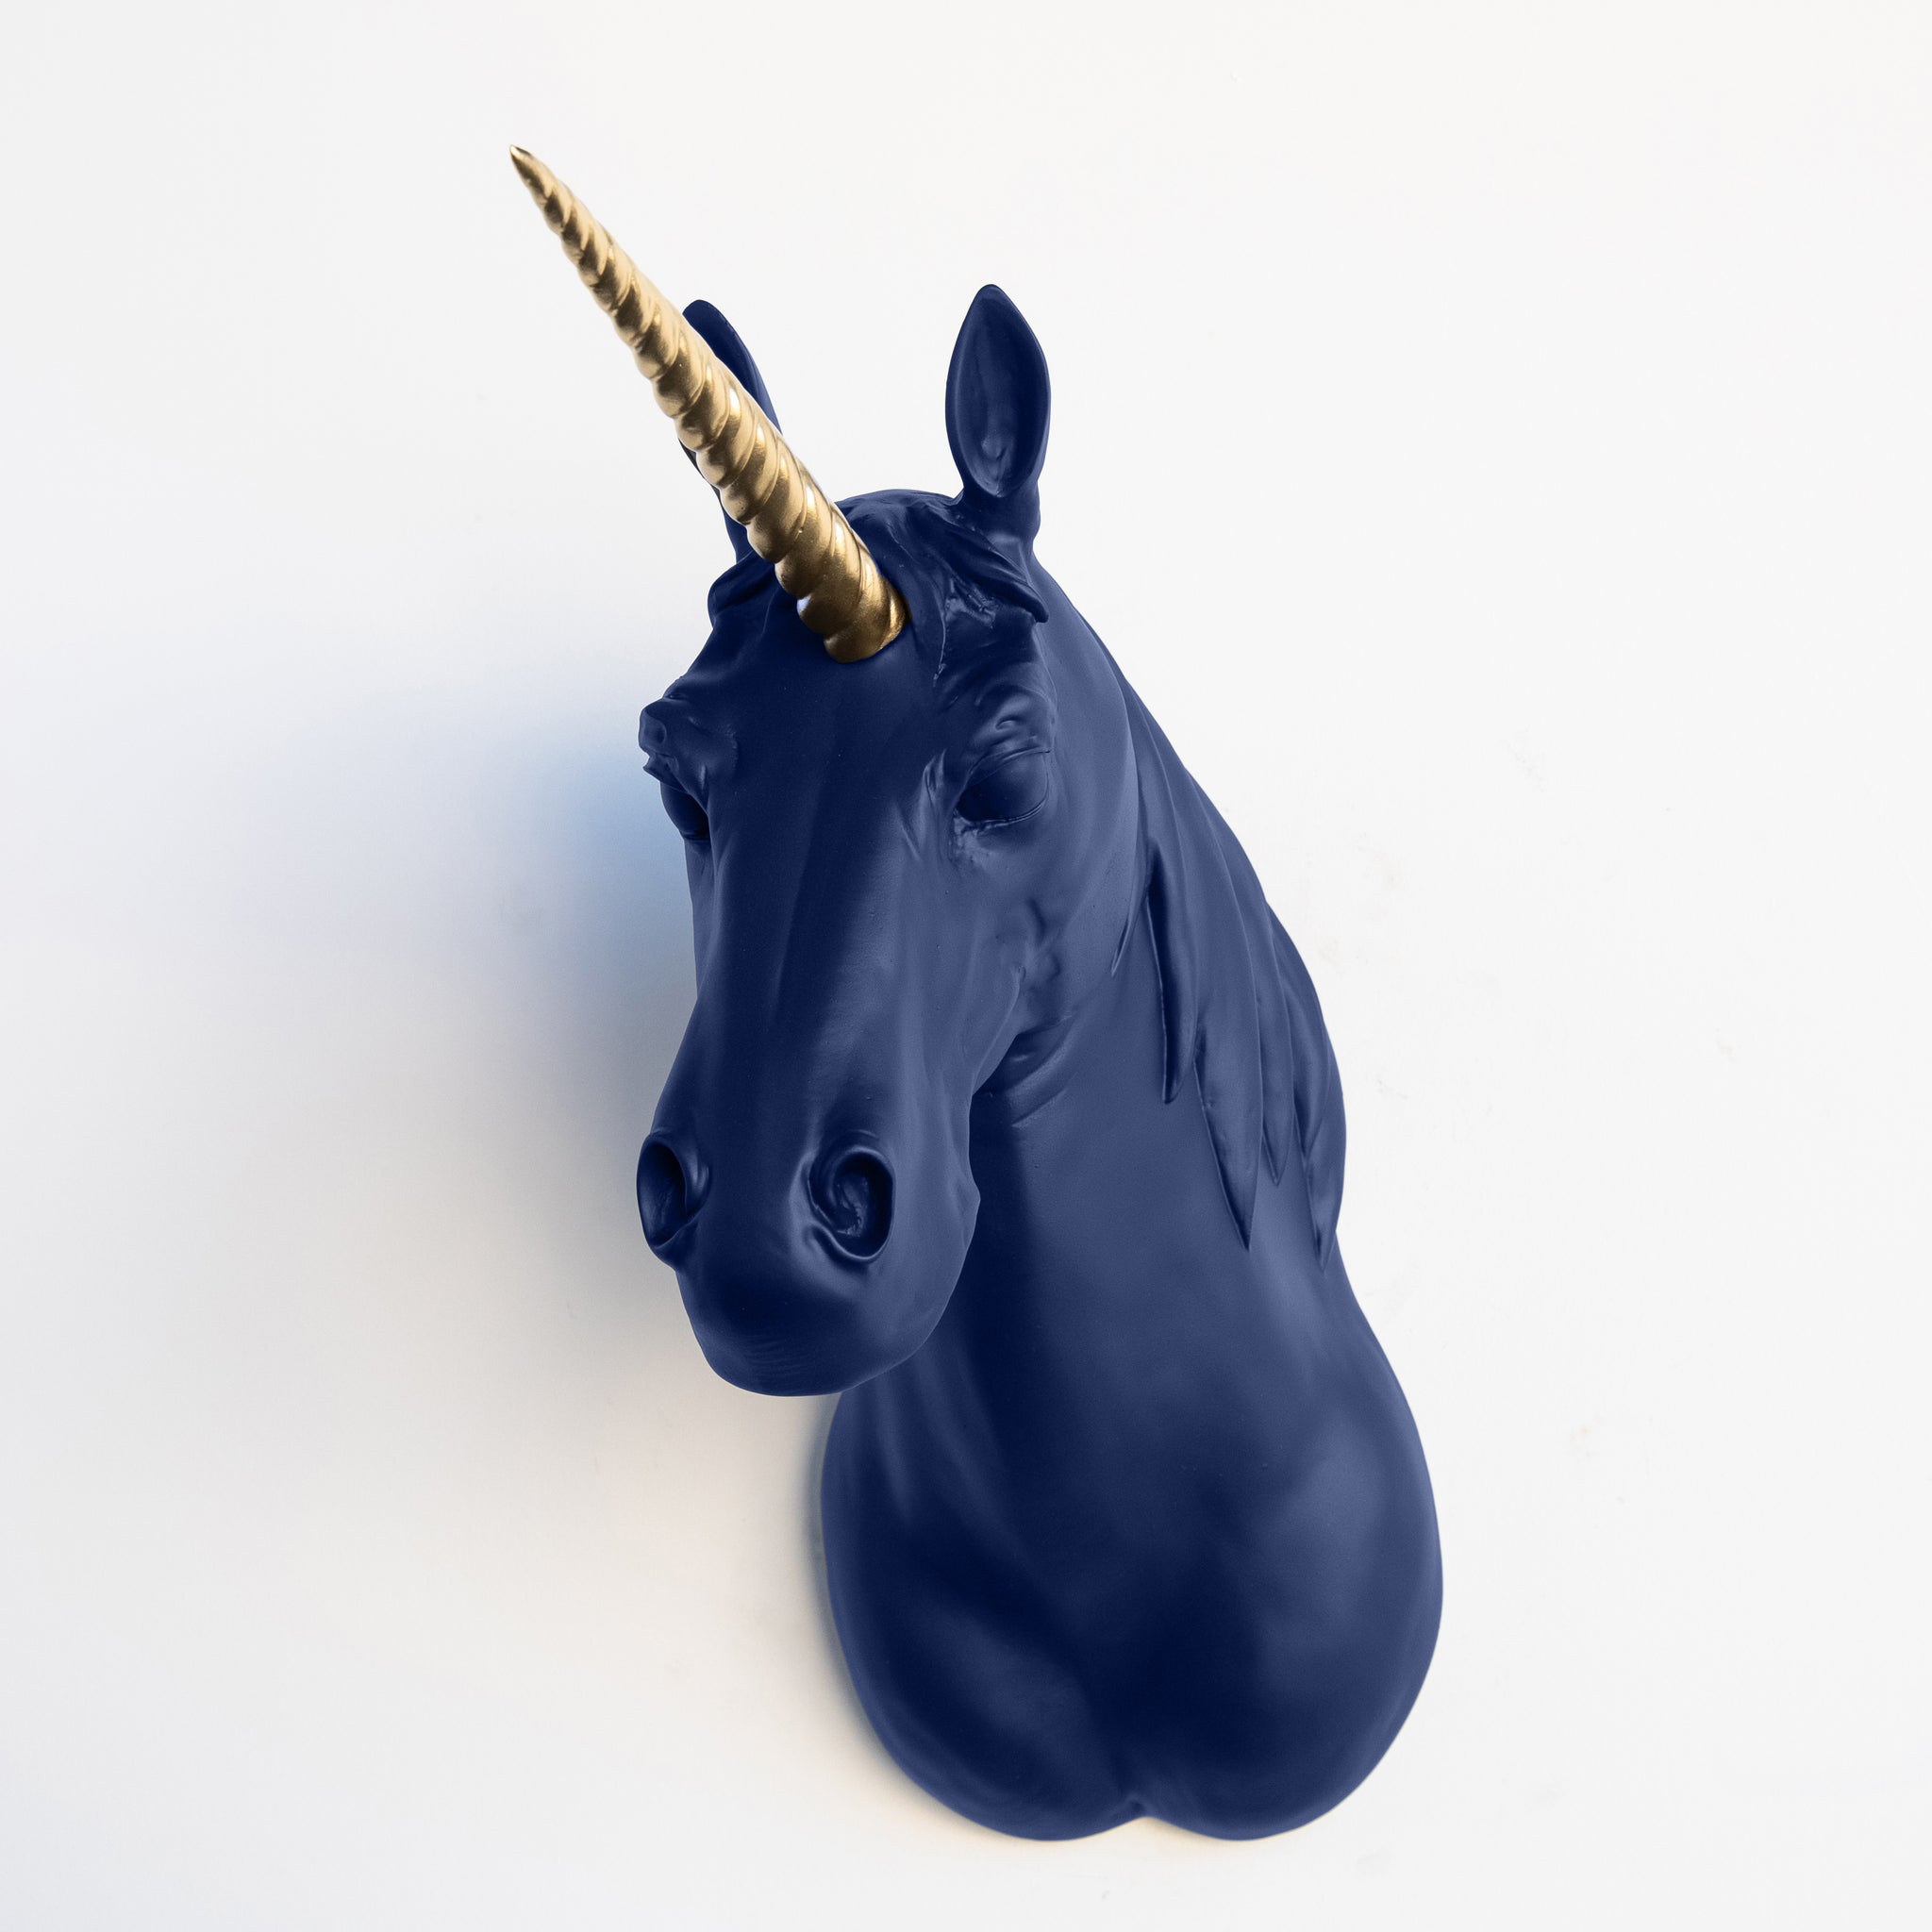 XL Unicorn Head Wall Mount // Navy Blue and Gold